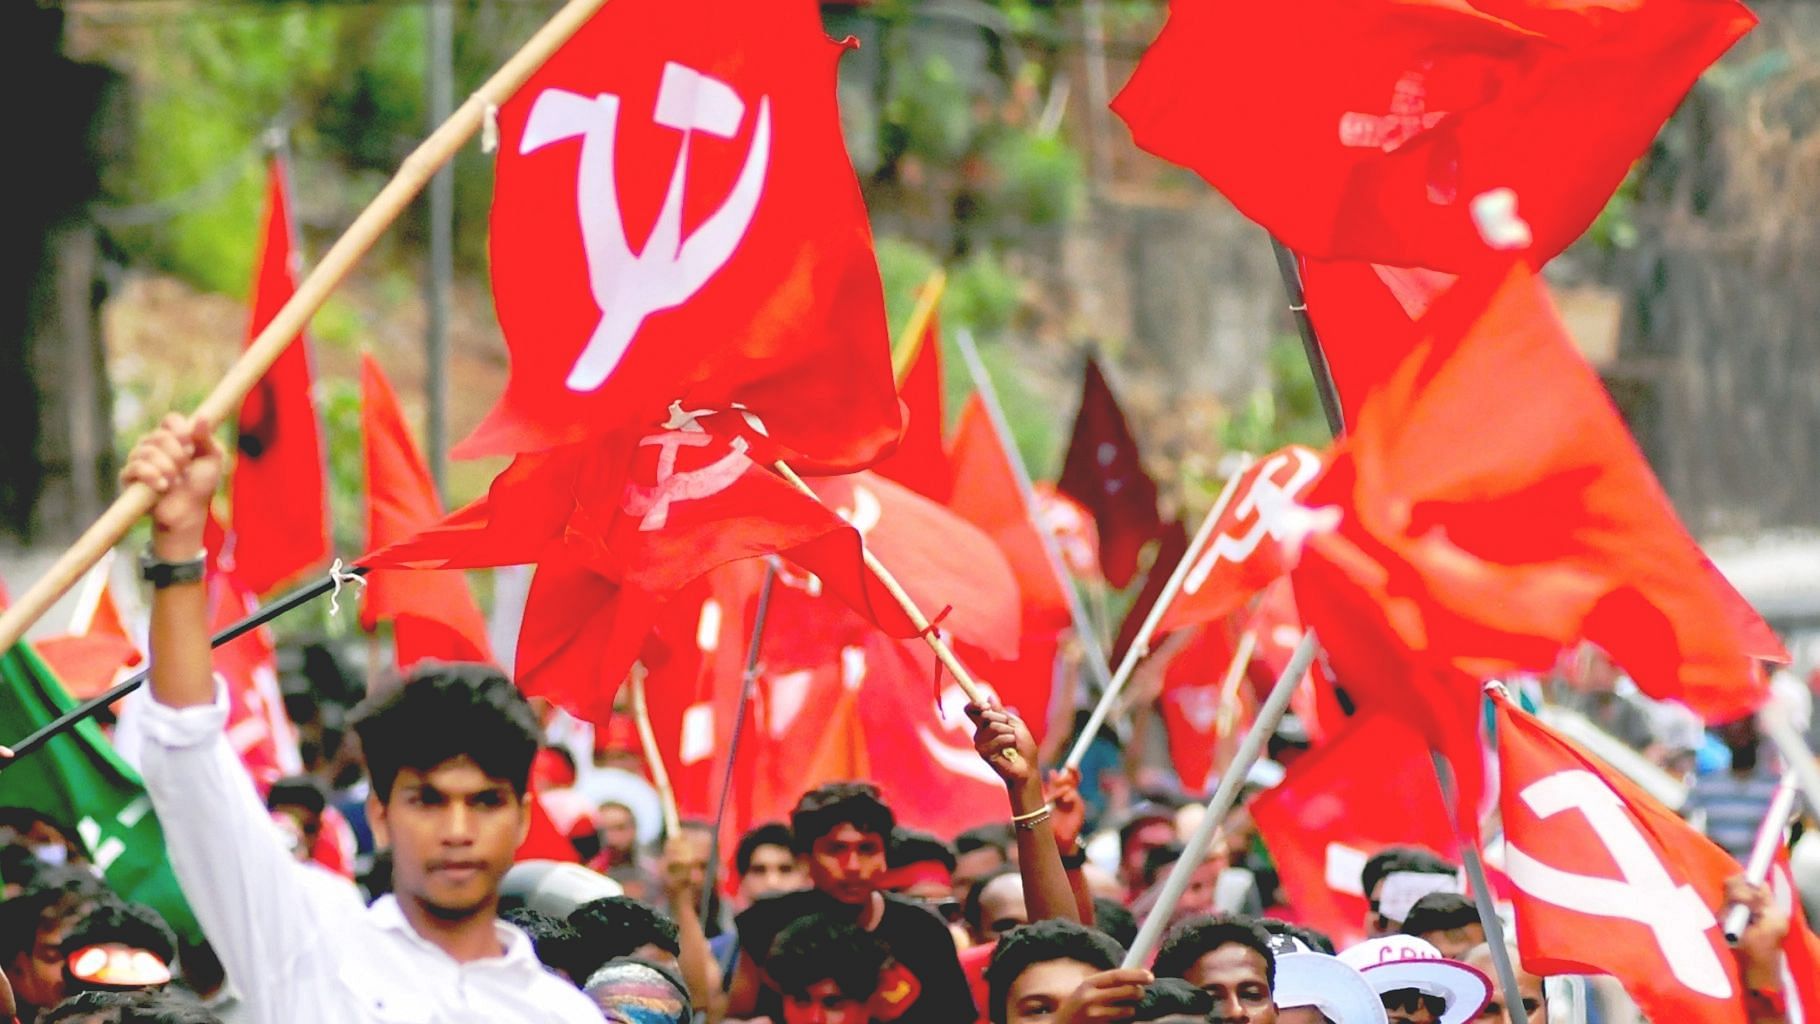 <div class="paragraphs"><p>The 23rd congress of the CPI(M) made news by inducting Ram Chandra Dome, the first Dalit face in its highest decision-making body, in its history of six decades.&nbsp;</p></div>